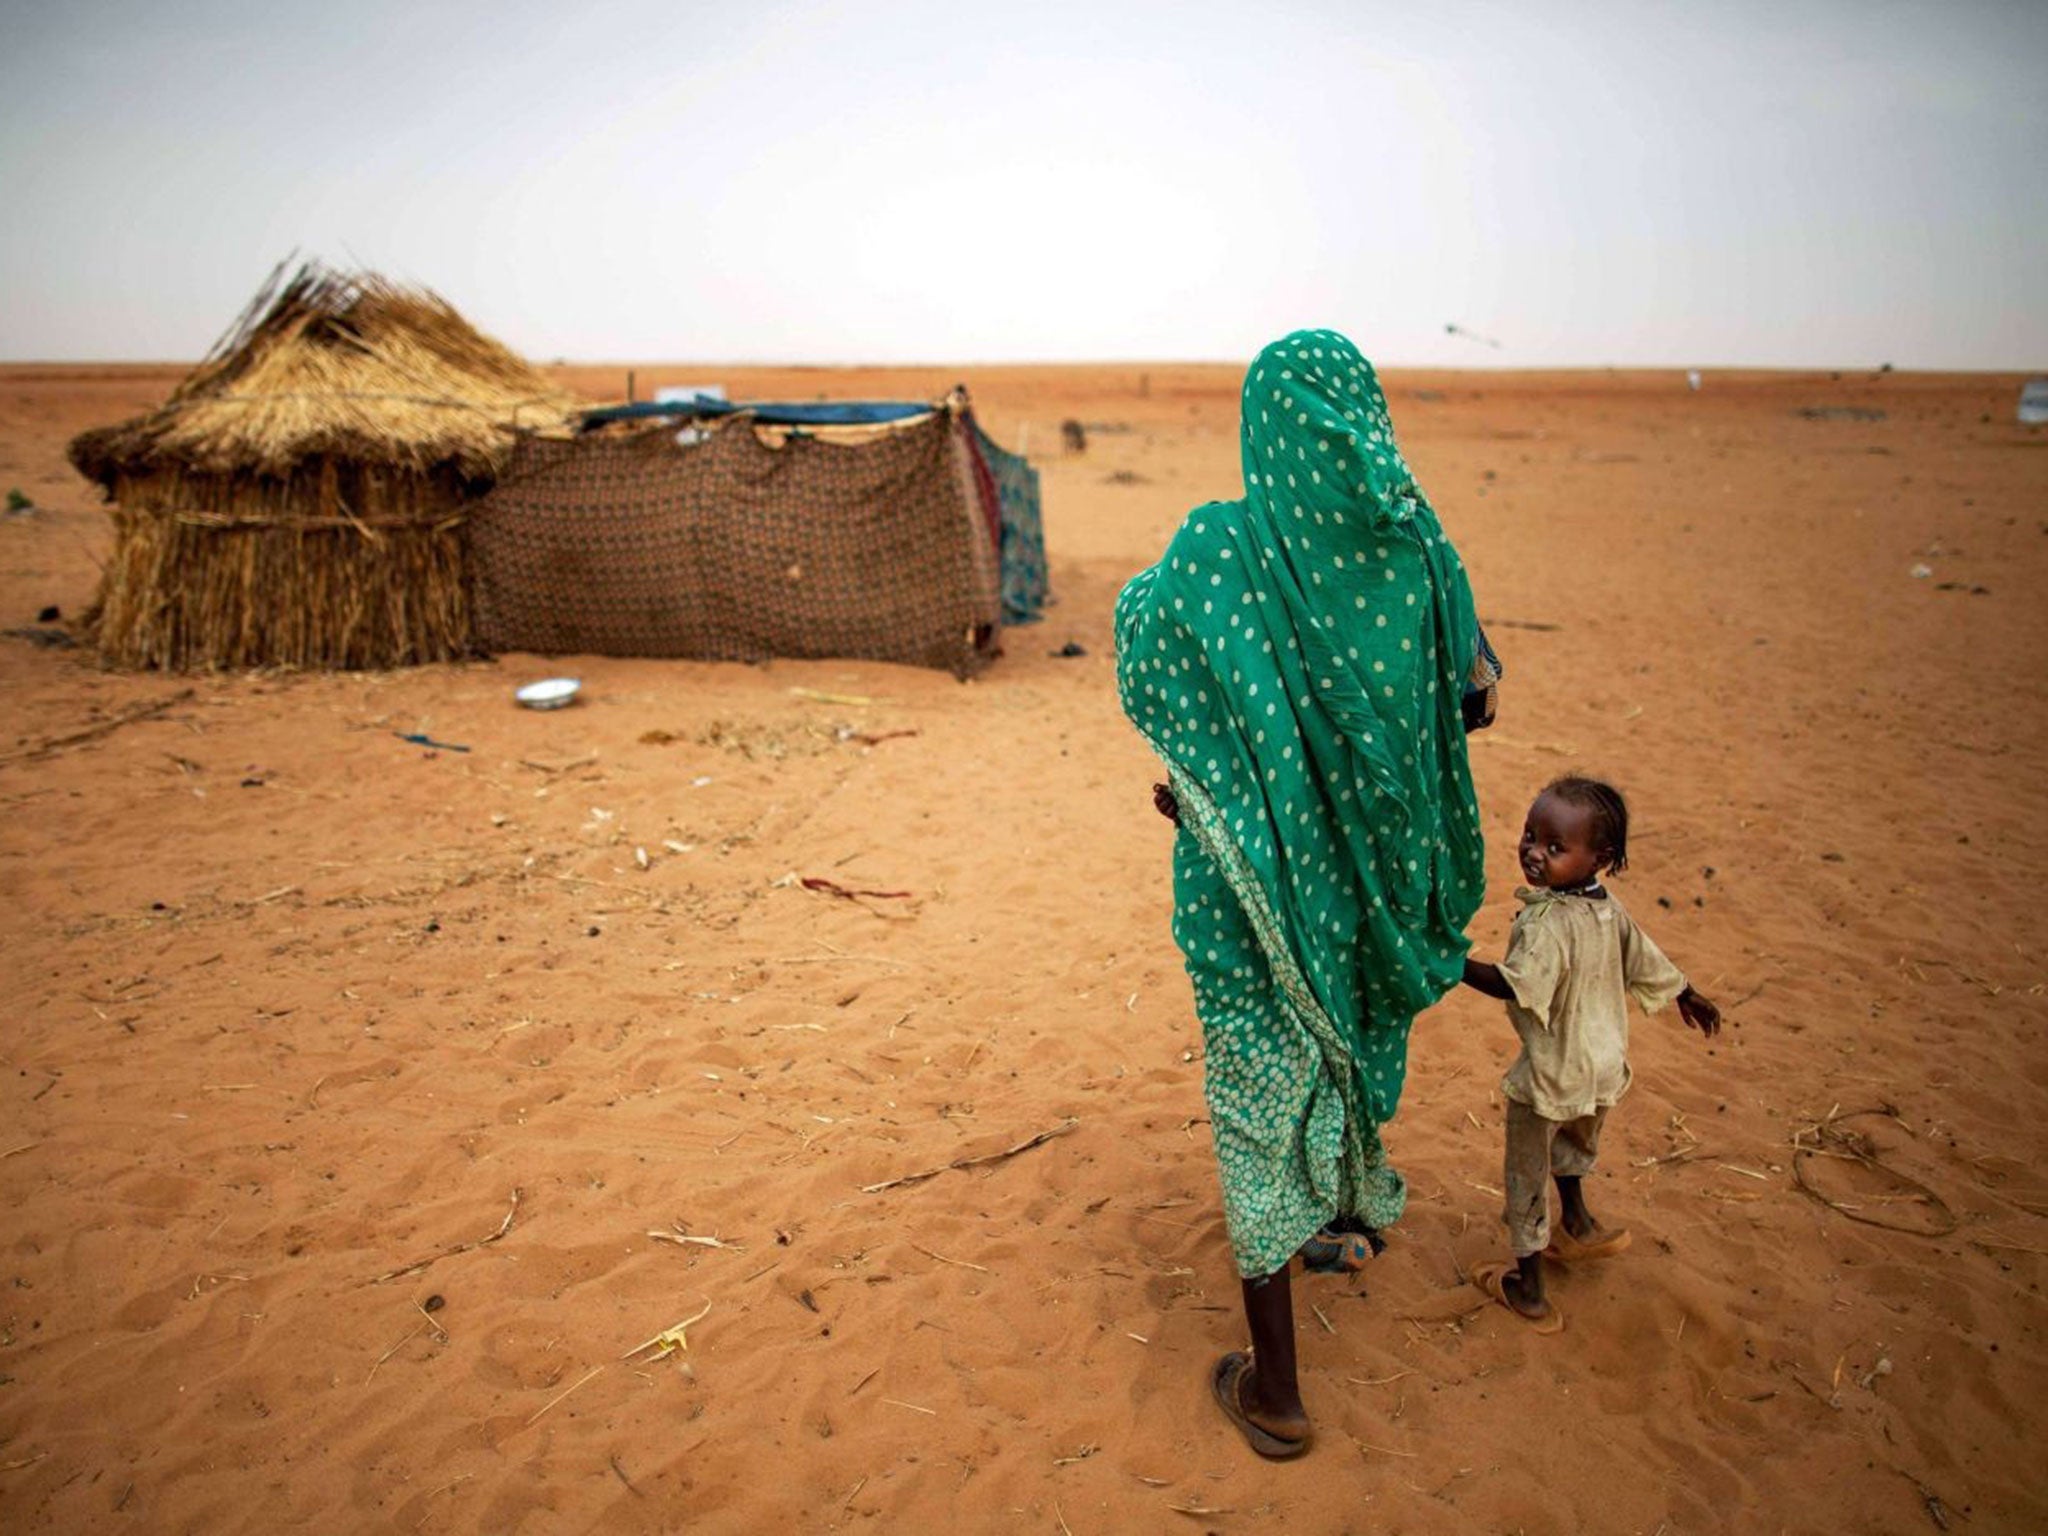 Victims of war: Women and children are still being targeted by opposition forces, despite the Darfur conflict officially ending eight years ago